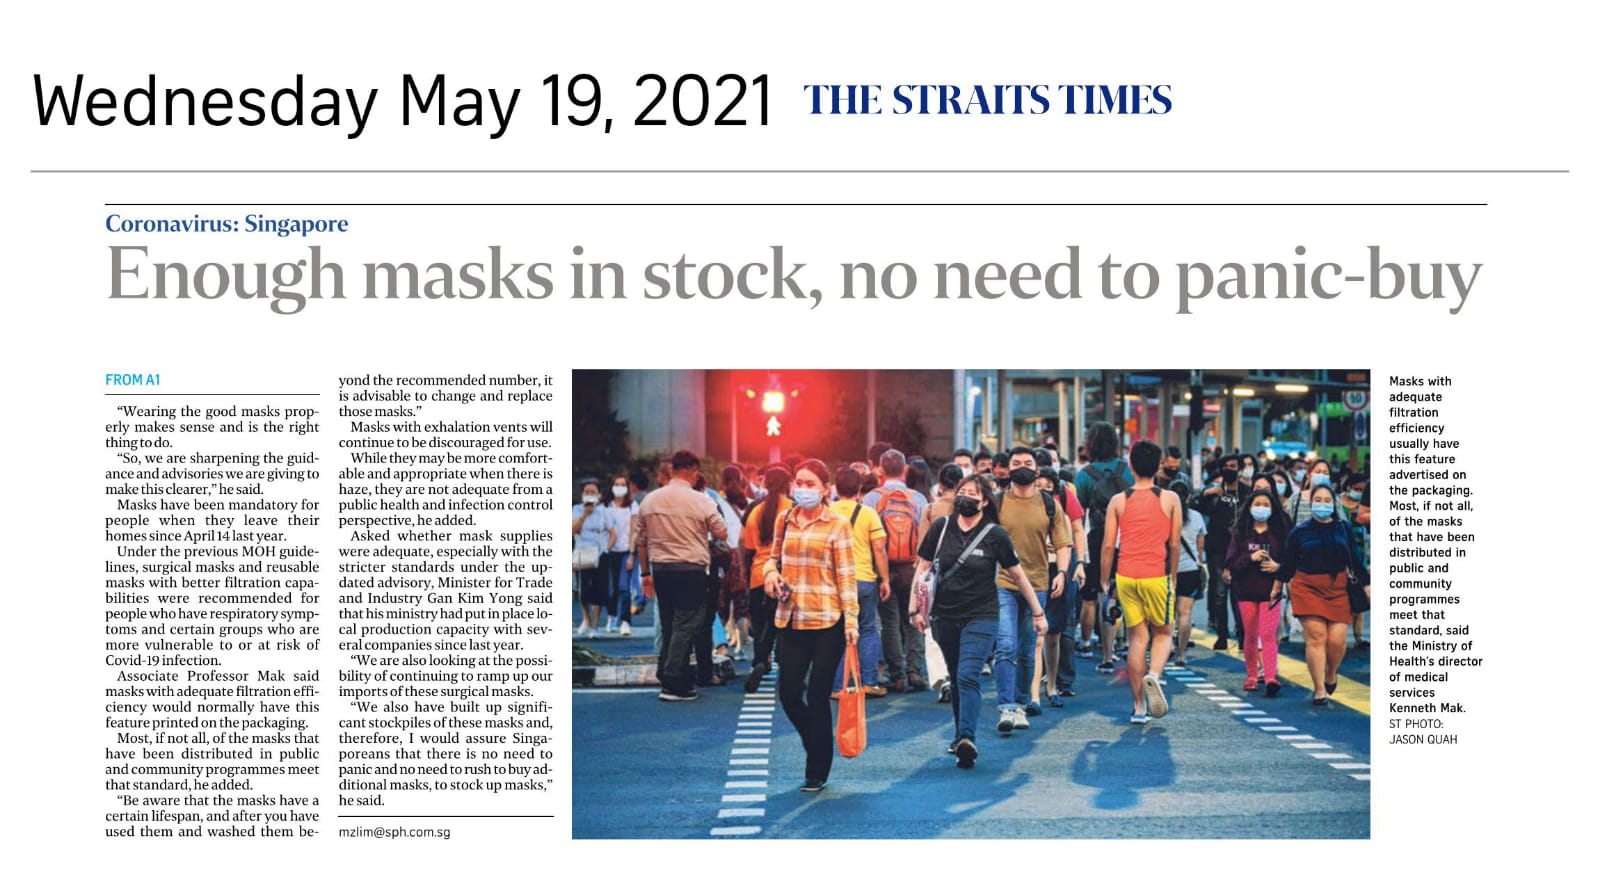 Enough masks in stock, no need to panic-buy - Published in The Straits Times May 19, 2021